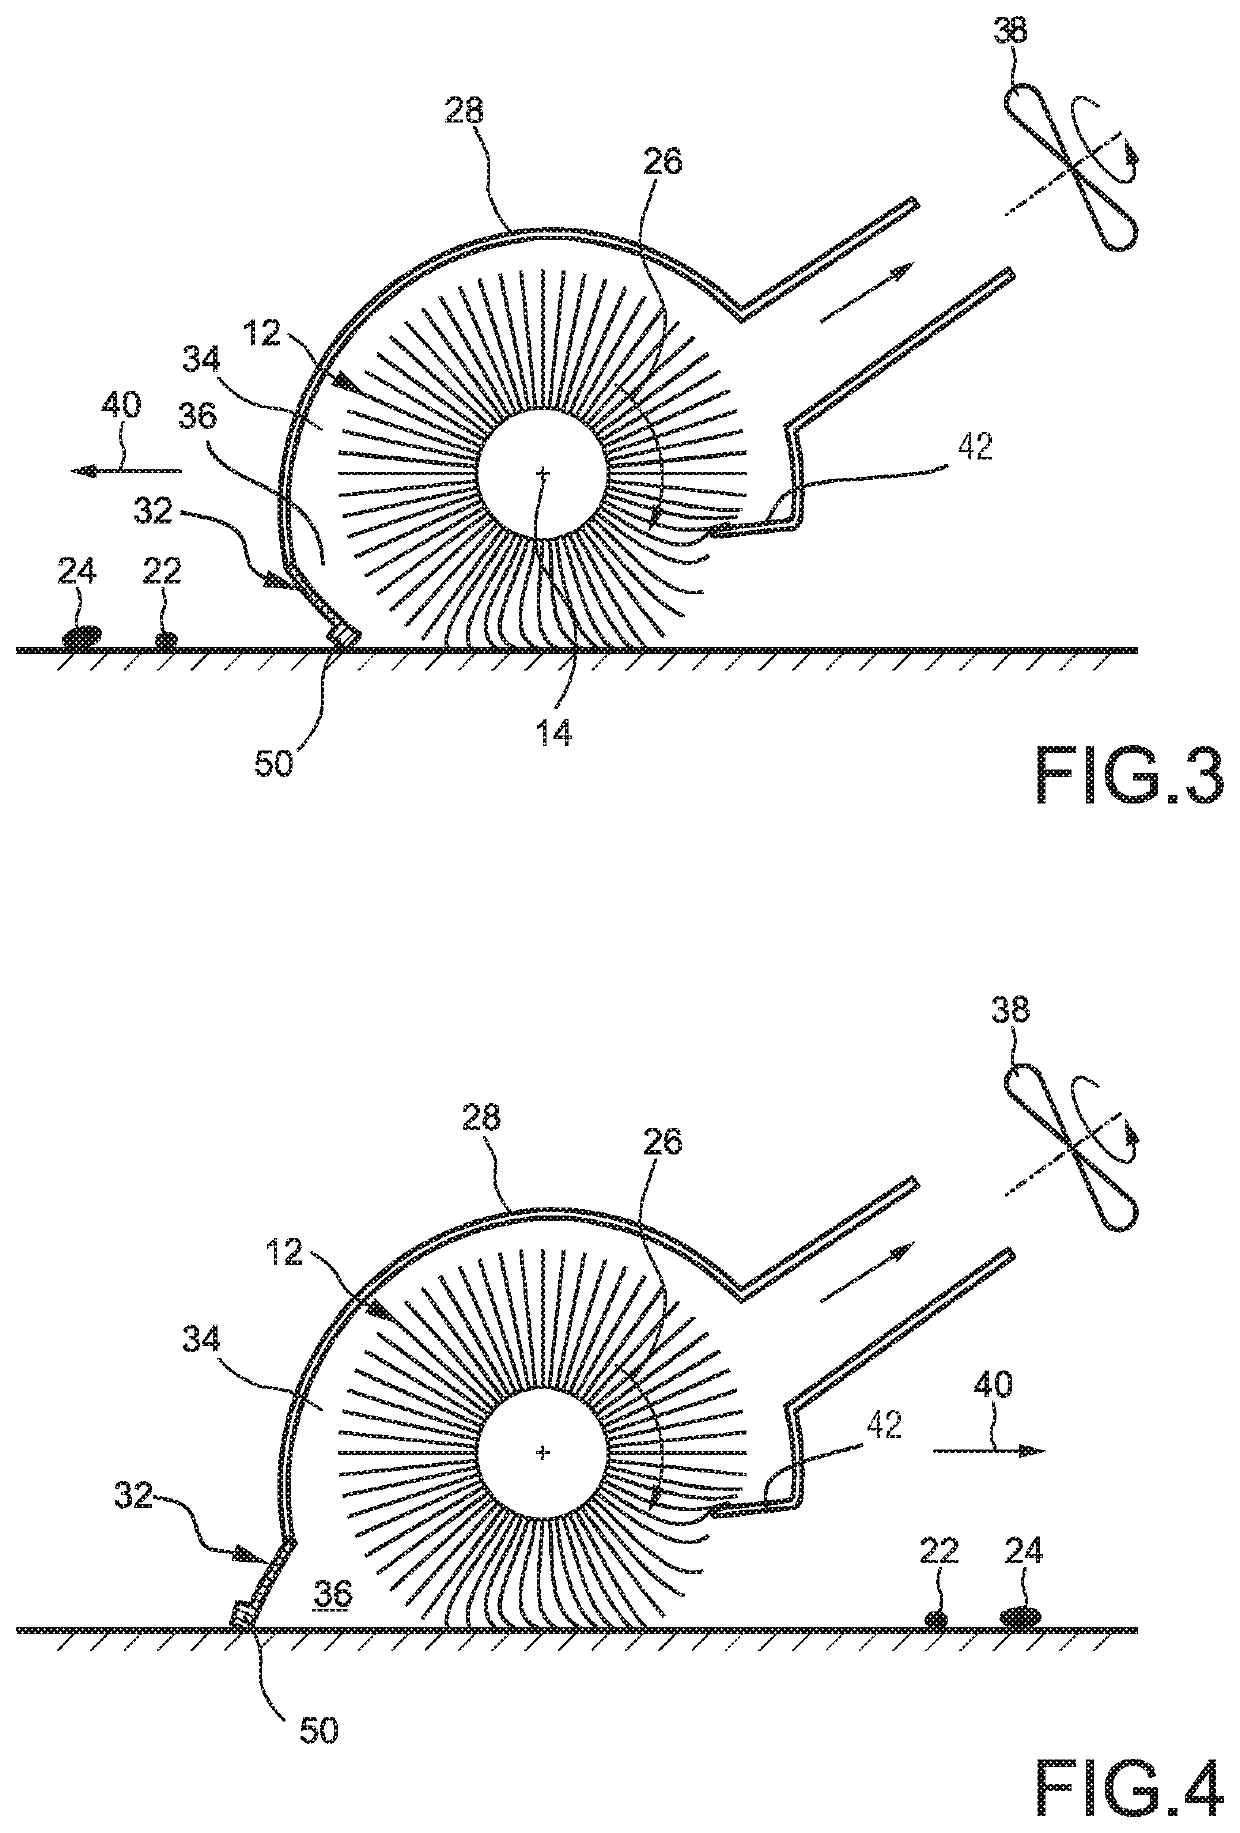 Nozzle arrangement of a cleaning device for cleaning a surface